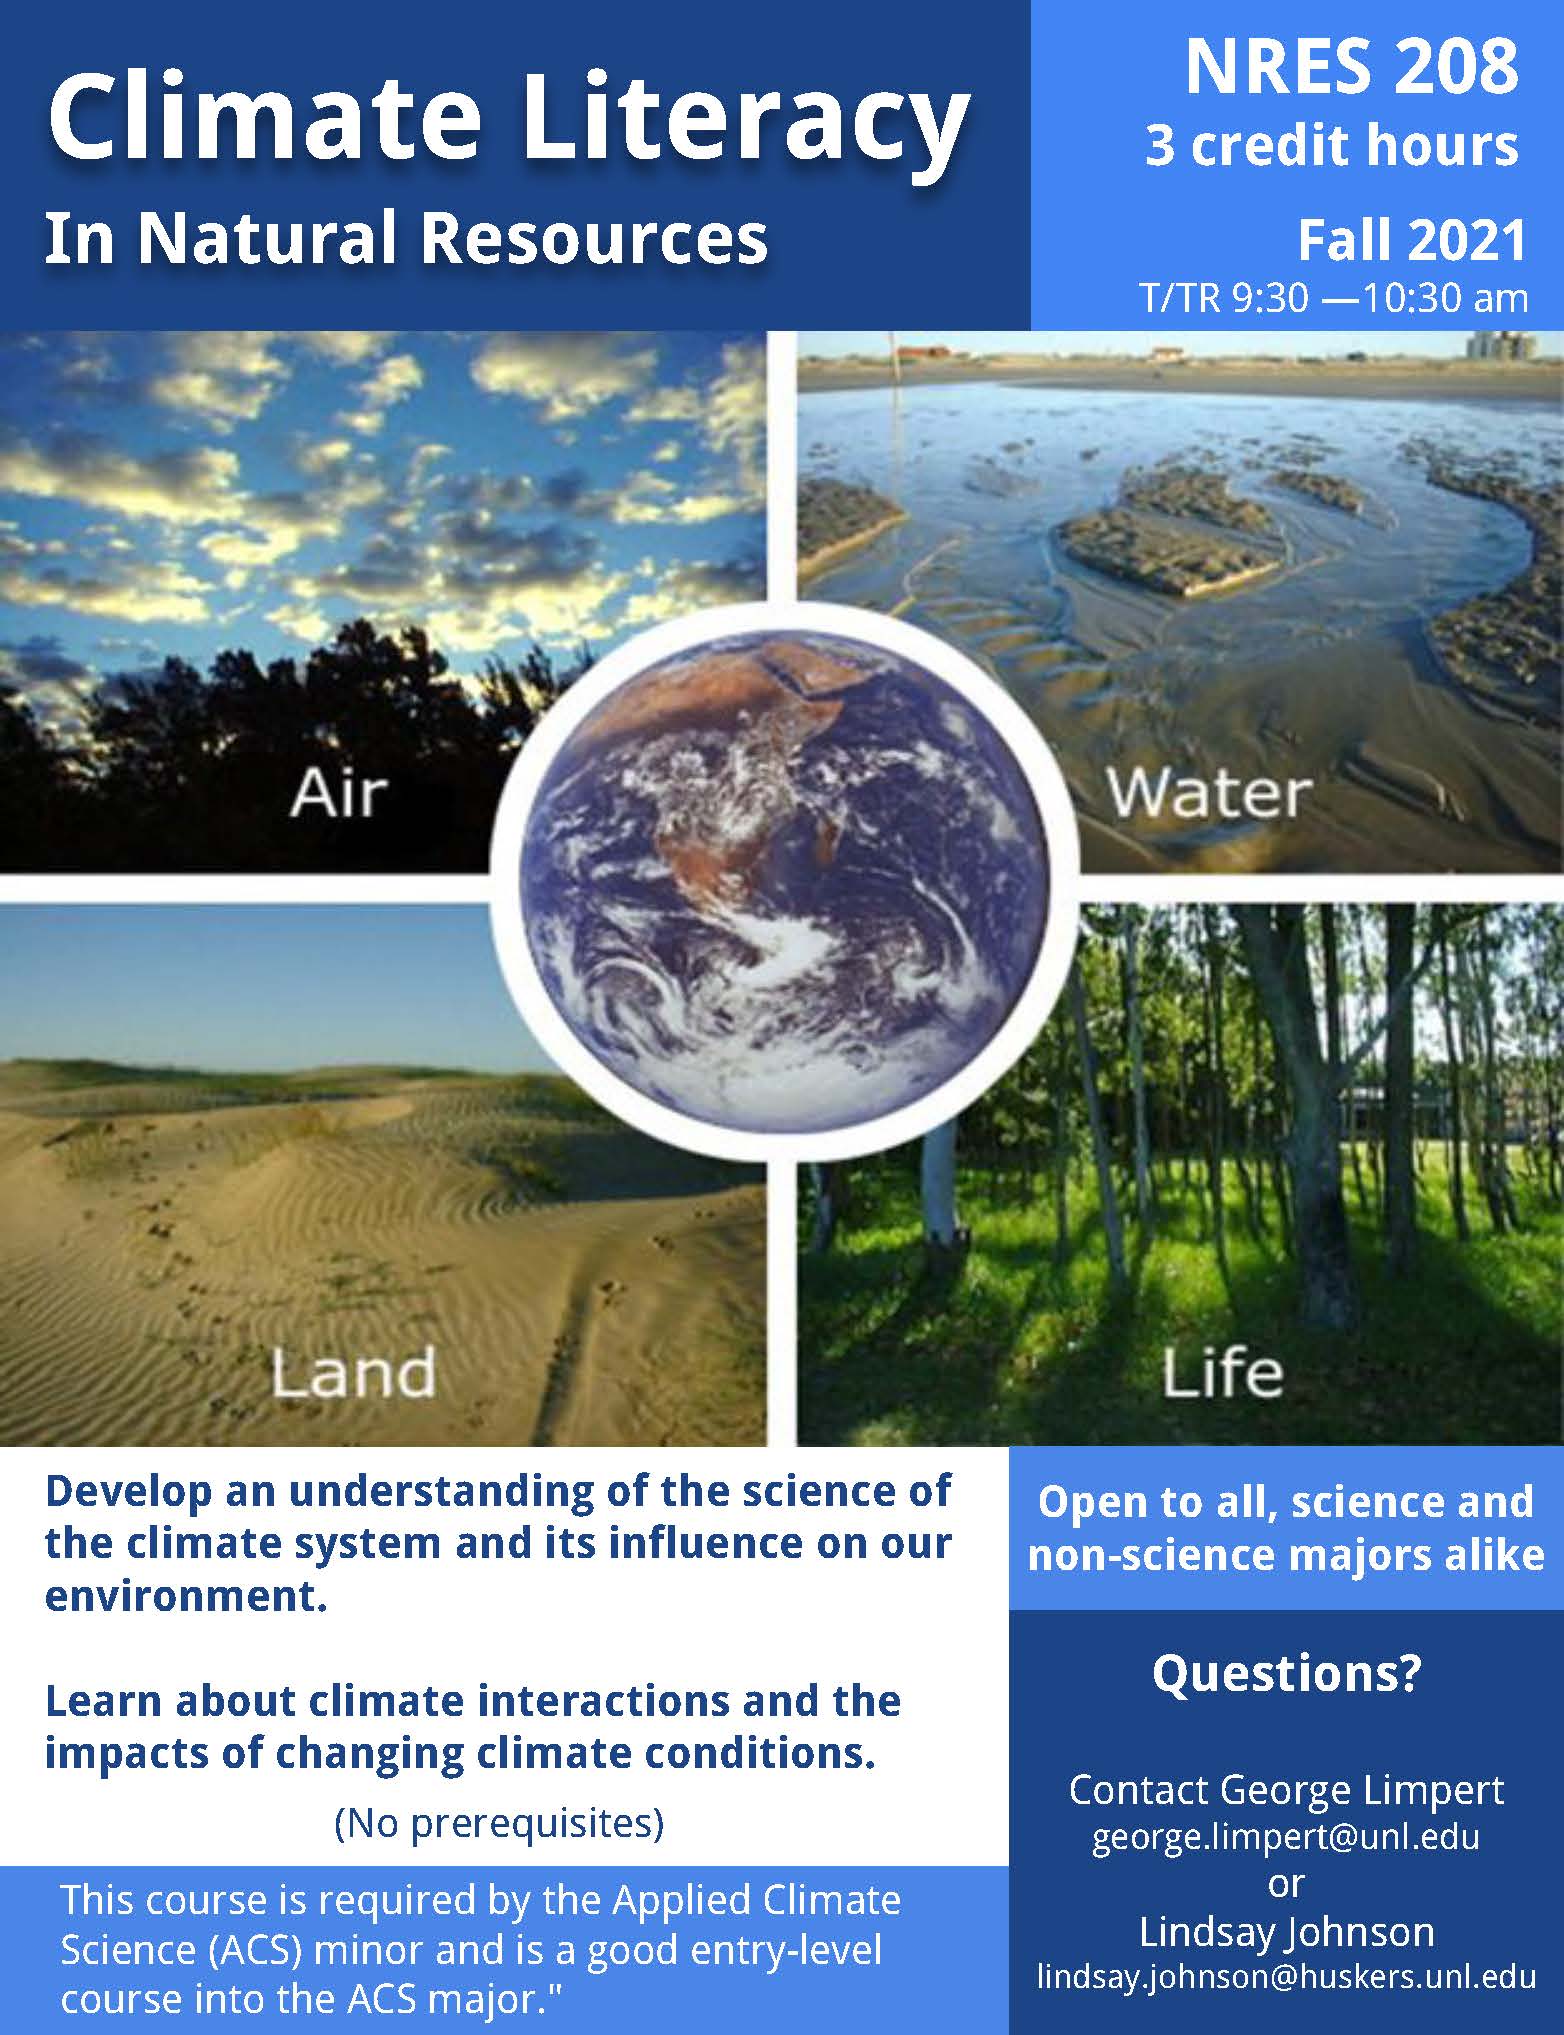 NRES 208: Climate Literacy in Natural Resources